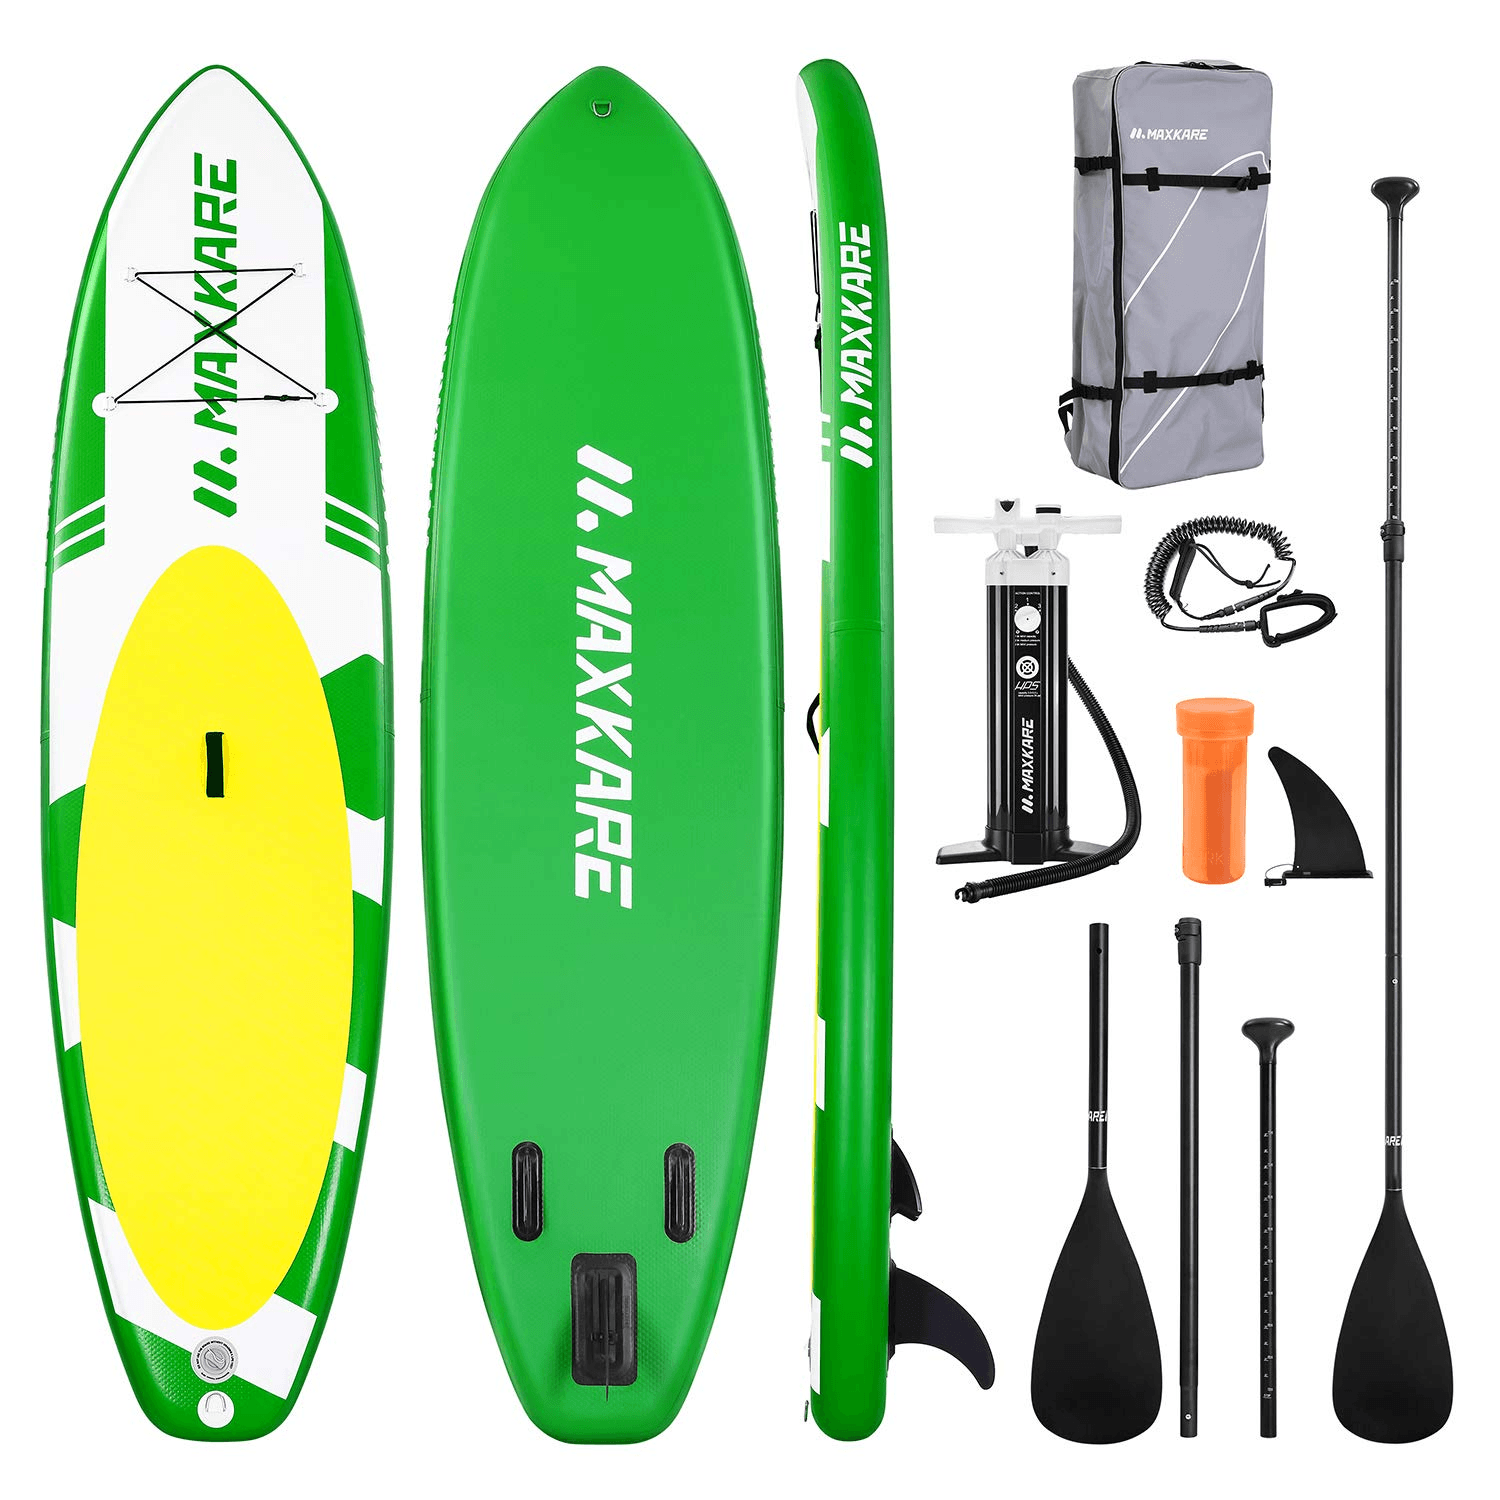 Inflatable MaxKare SUP Board Stand MAXKARE Up Board – Paddle Paddle